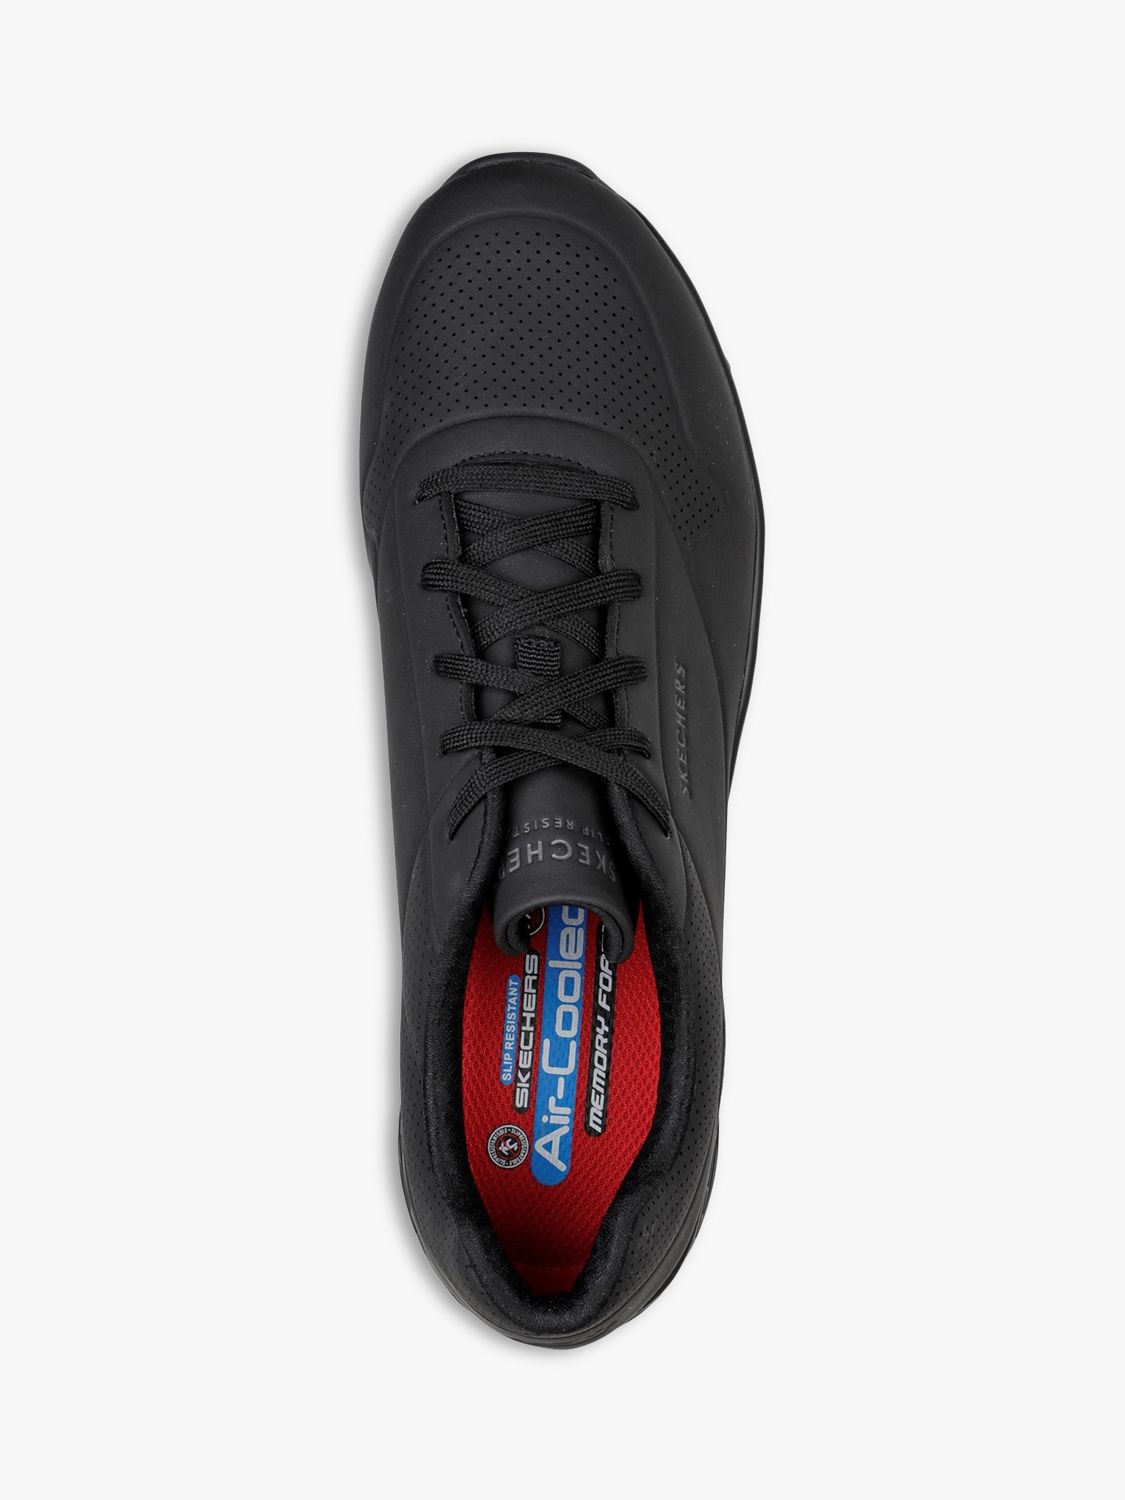 Skechers Work Relaxed Fit: Uno SR - Sutal Safety Shoes, Black at John Lewis  & Partners